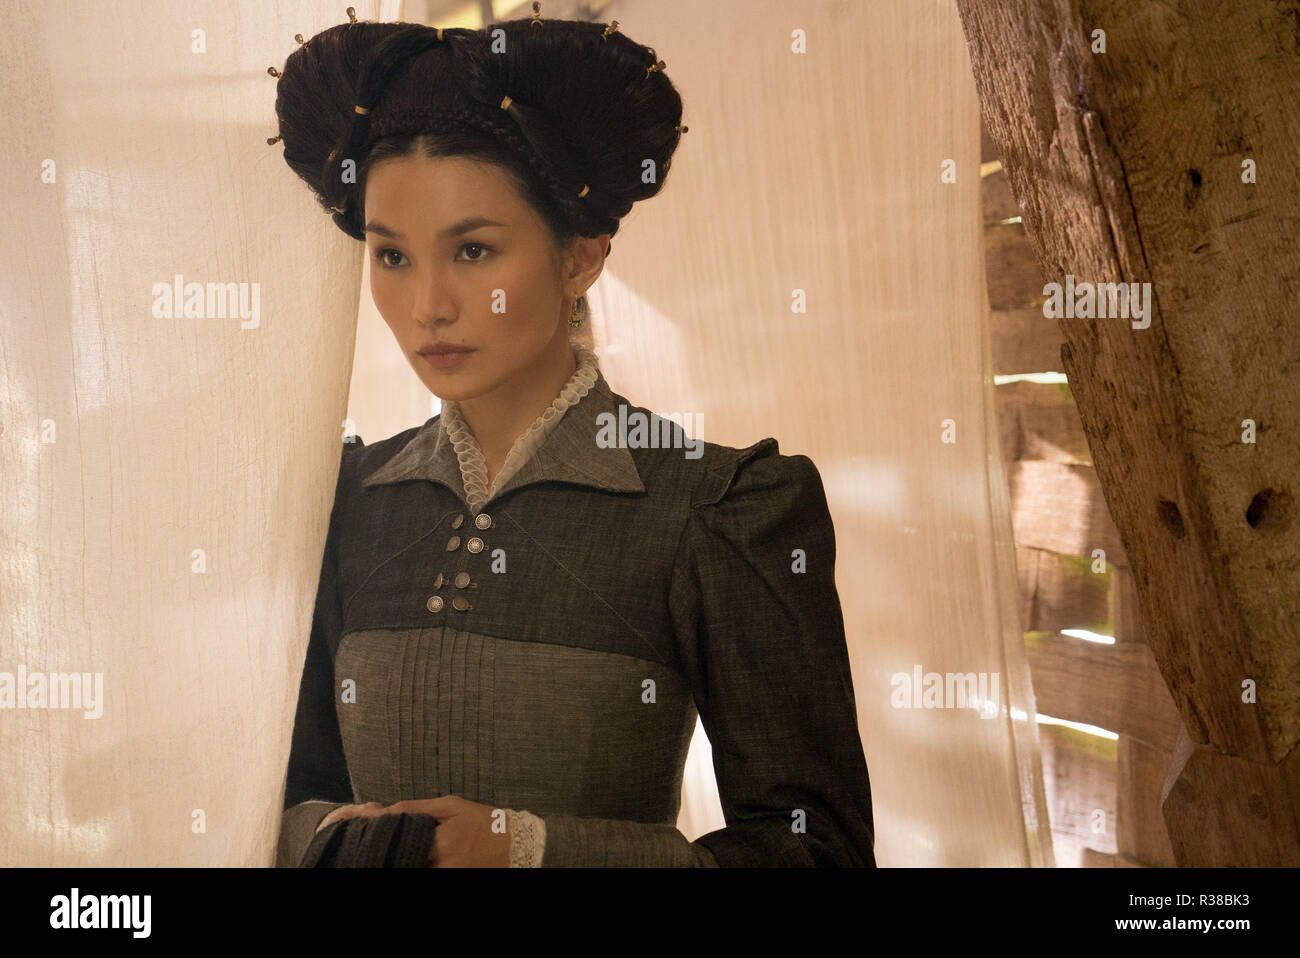 RELEASE DATE: November 2, 2018 TITLE: Mary Queen Of Scots STUDIO: Focus Features DIRECTOR: Josie Rourke PLOT: Mary Stuart's attempt to overthrow her cousin Elizabeth I, Queen of England, finds her condemned to years of imprisonment before facing execution. STARRING: GEMMA CHAN as Bess of Hardwick. (Credit Image: © Focus Features/Entertainment Pictures) Stock Photo